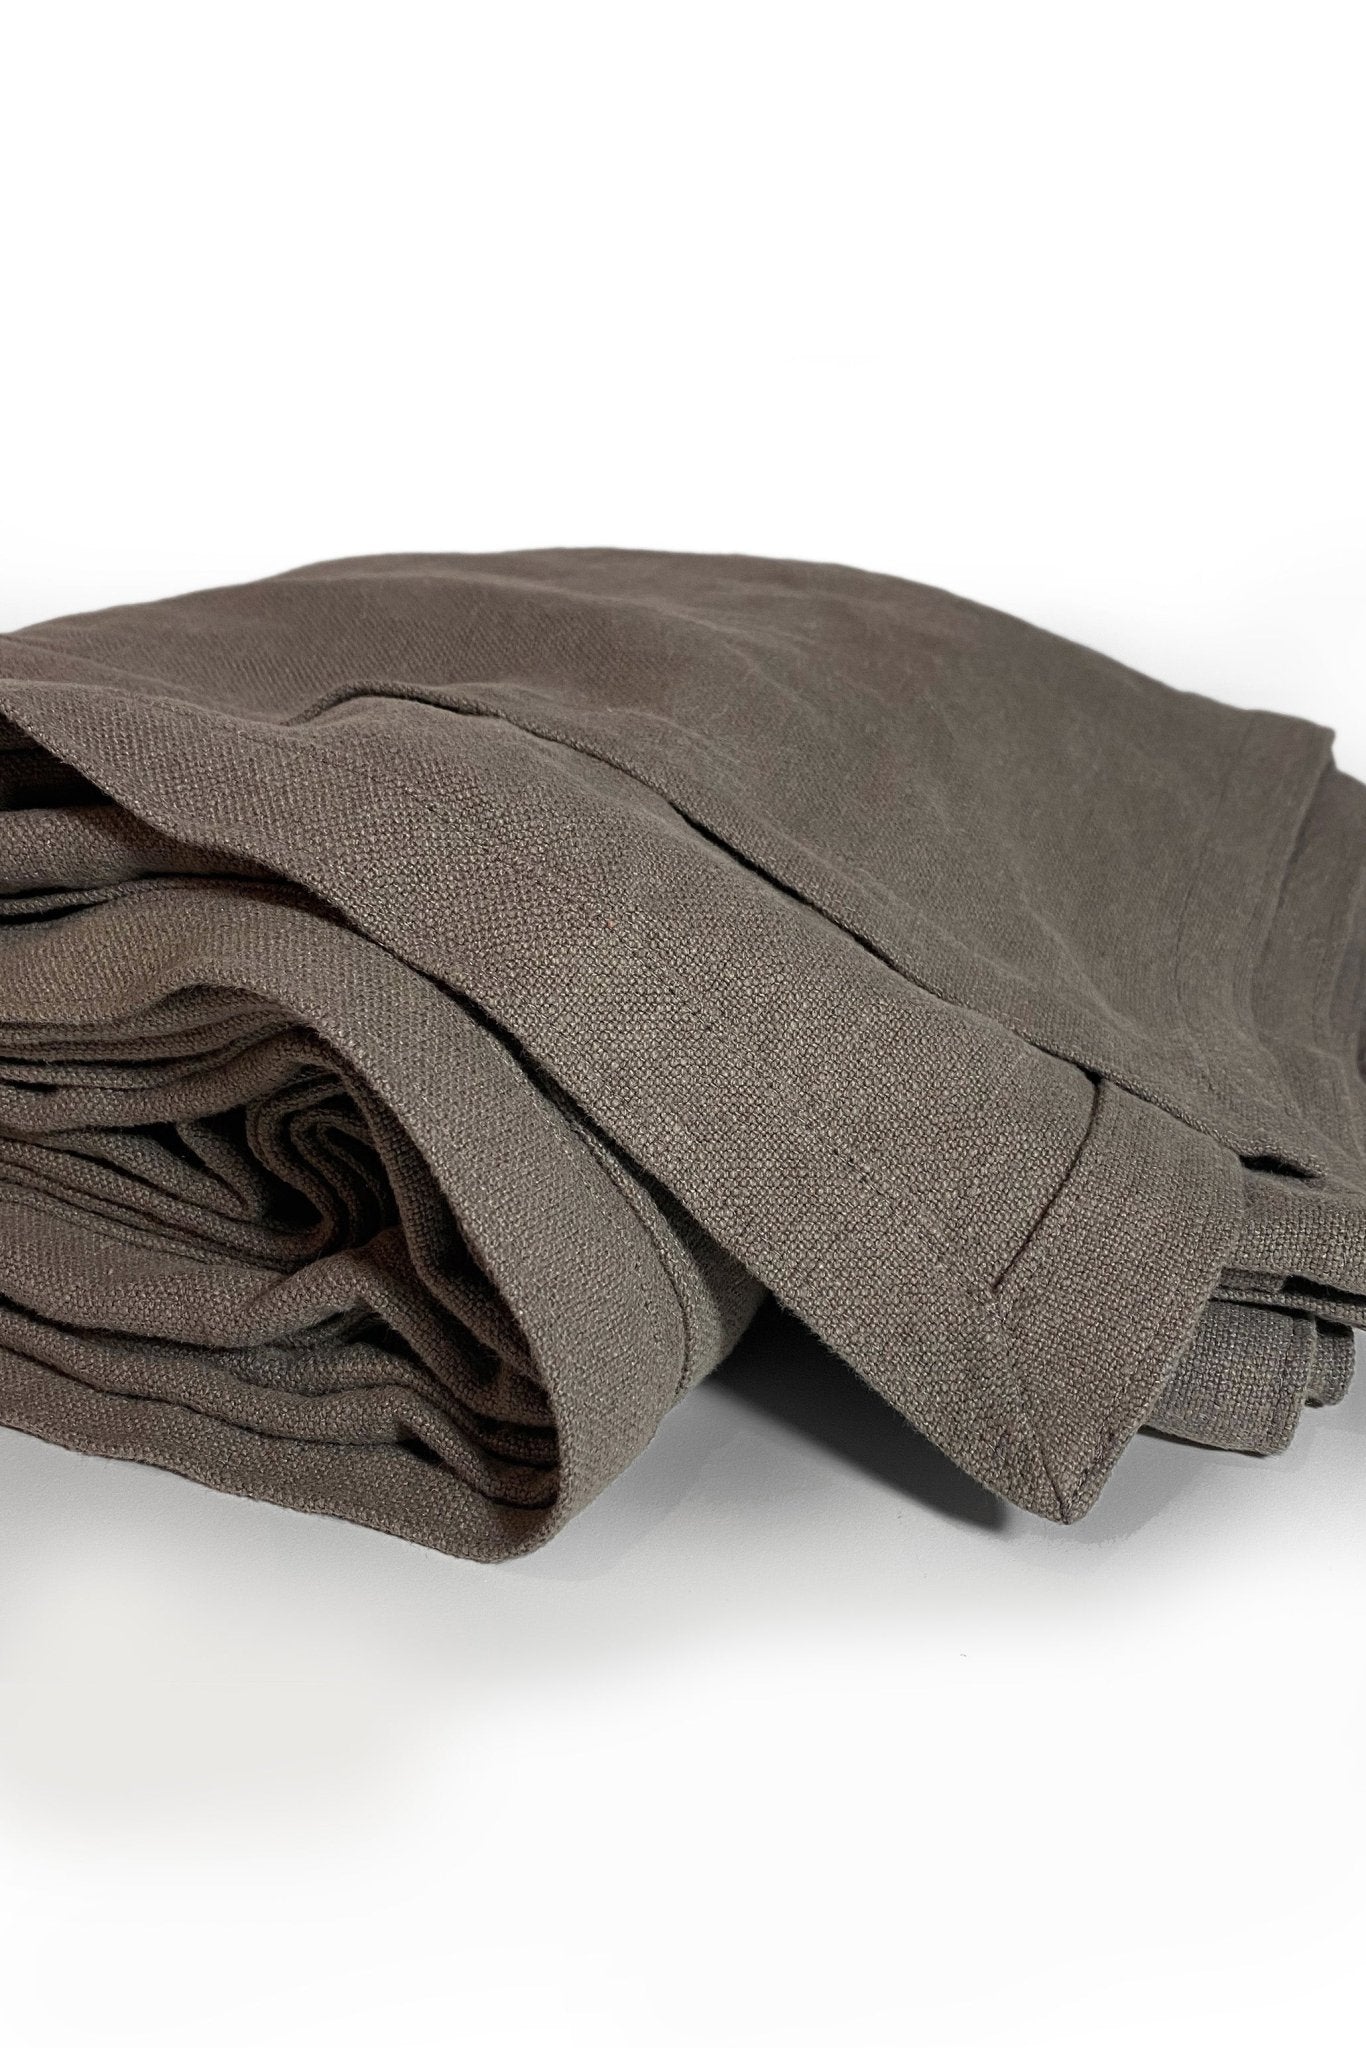 Utility Bed Throw Stonewashed Linen Blanket in Smoke Grey - Biggs & Hill - Blanket - Bedspread - blanket - charcoal